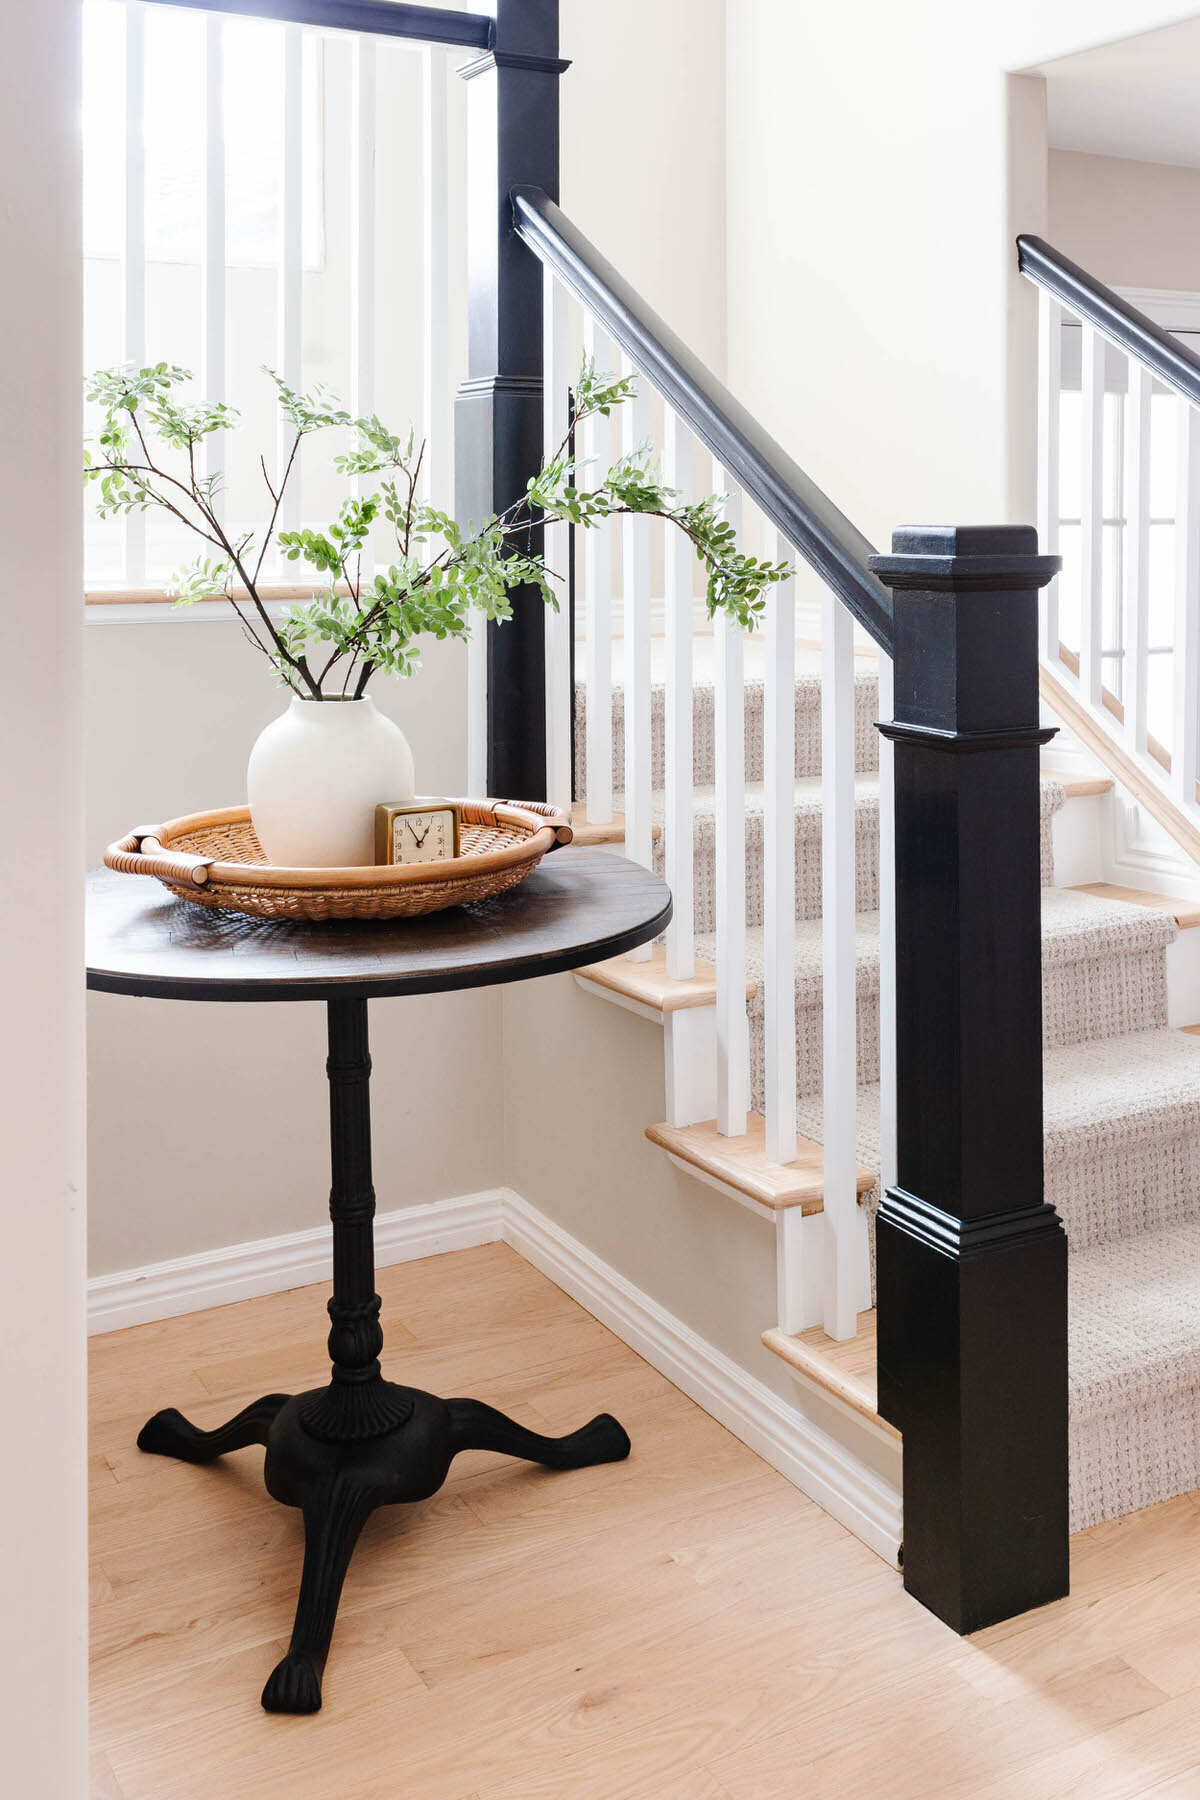 Modern Farmhouse Charming Cottage Warm White and Black Staircase Stairway Entryway by Peggy Haddad Interiors39